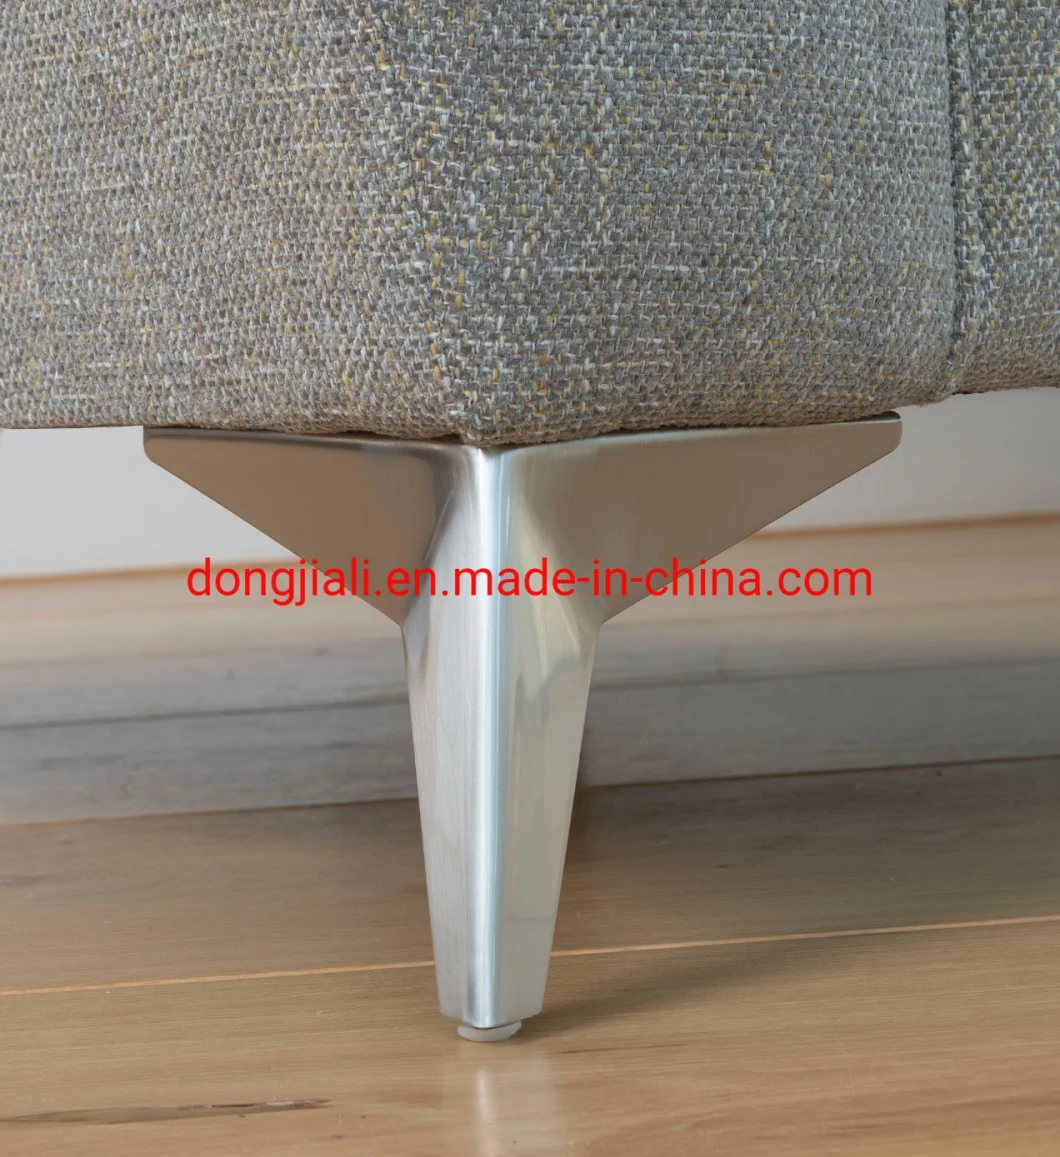 High Quality Furniture Parts Customized Different Sizes Sofa Legs Table Sofa Bench Leg